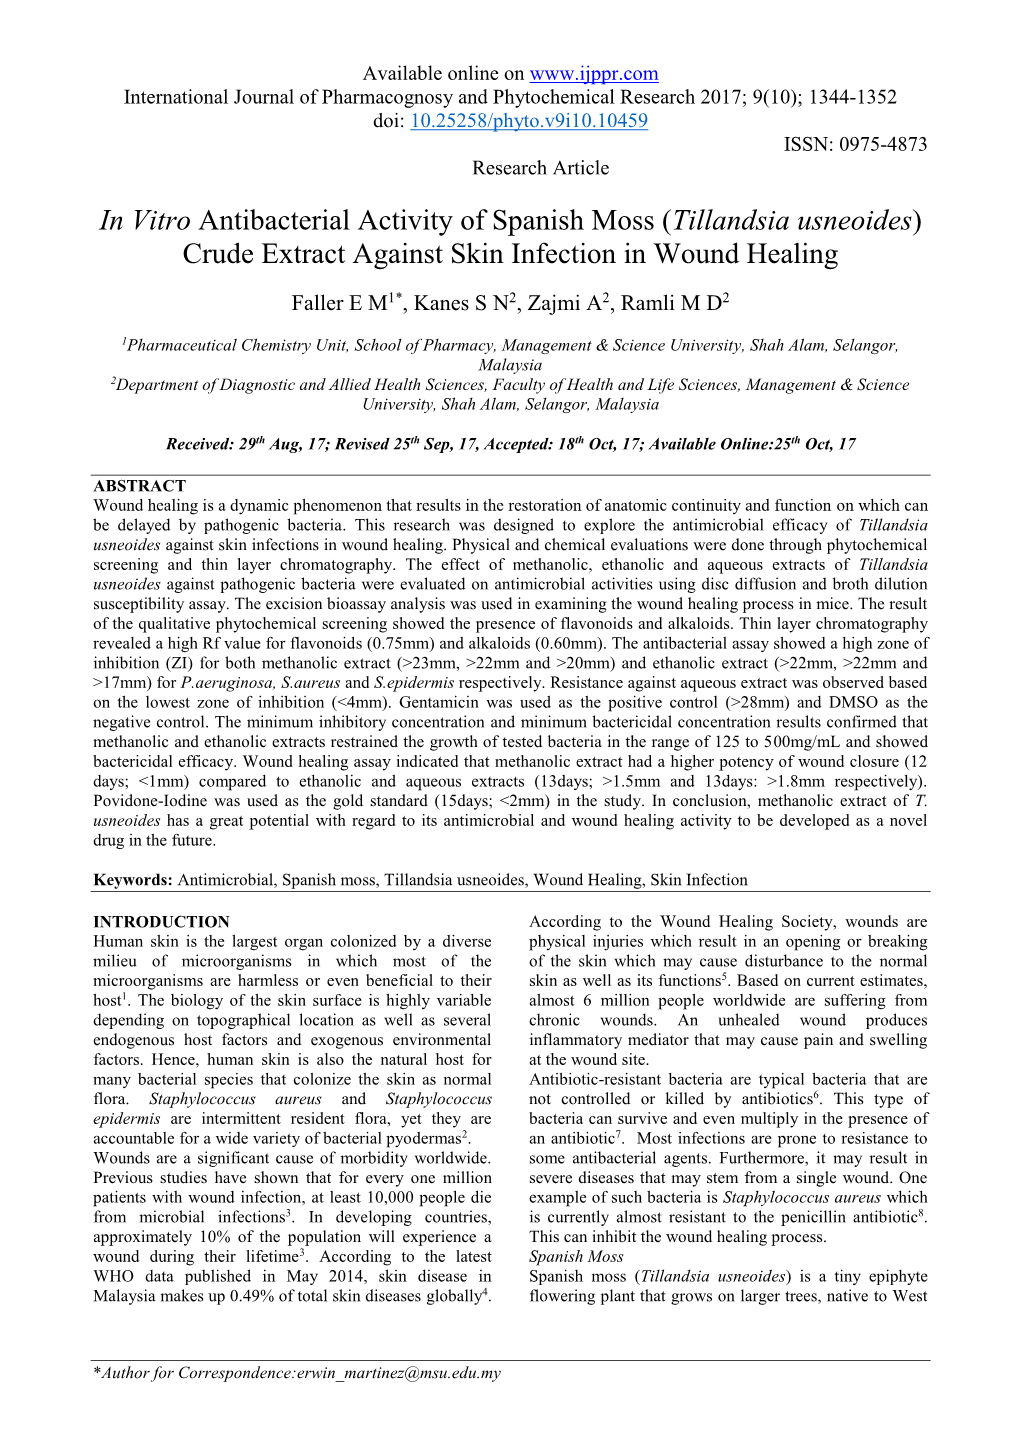 In Vitro Antibacterial Activity of Spanish Moss (Tillandsia Usneoides) Crude Extract Against Skin Infection in Wound Healing